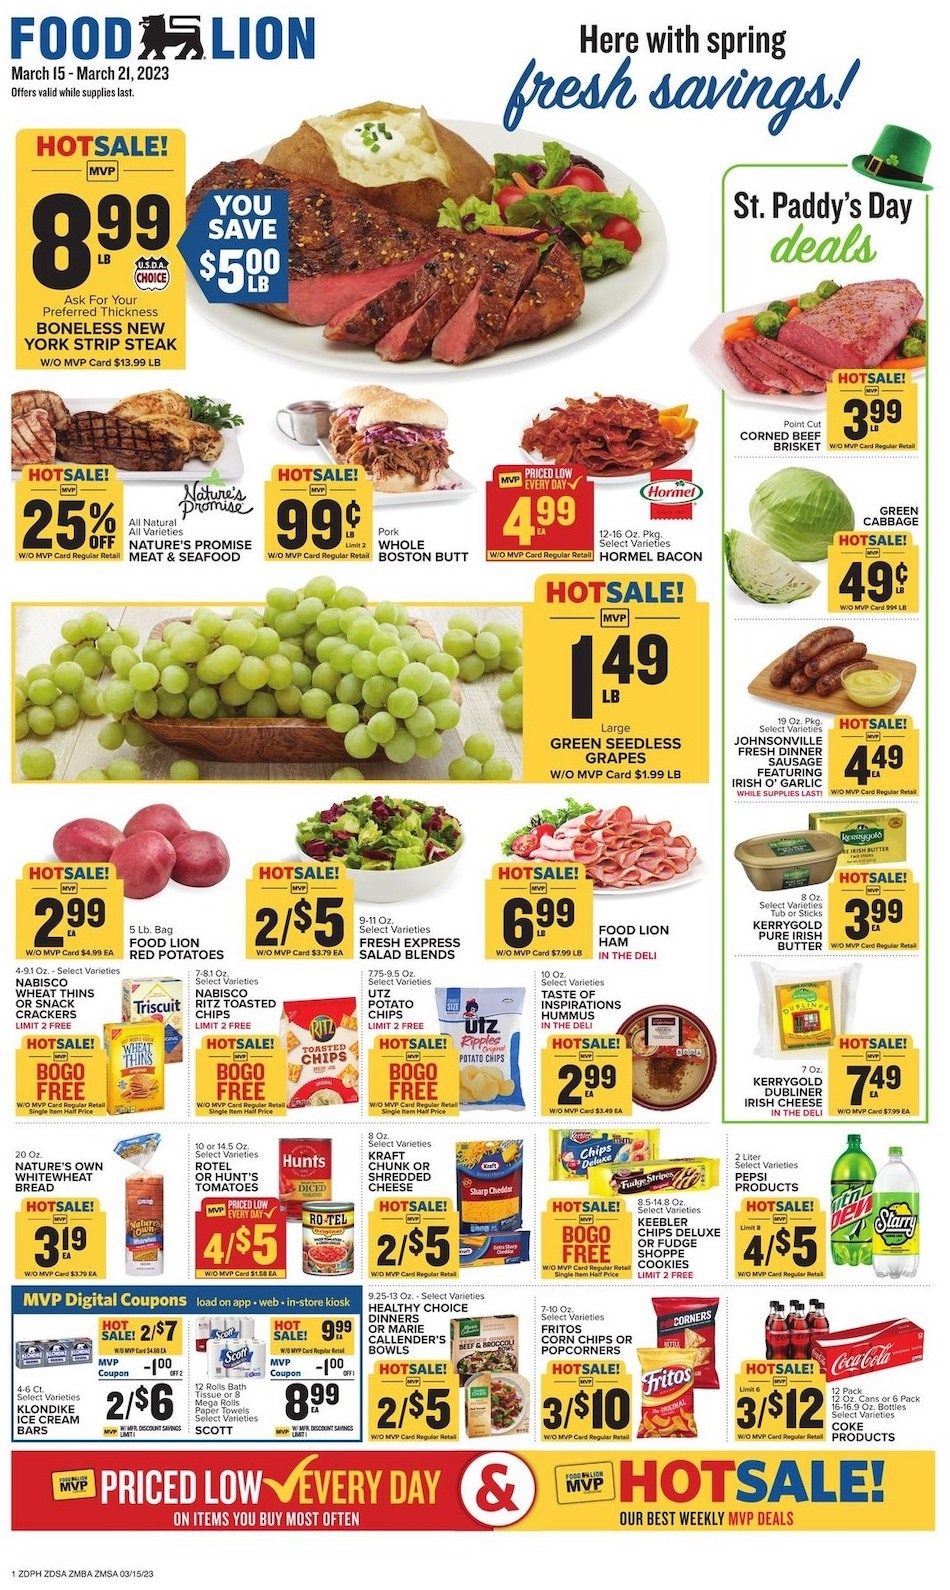 Food Lion Weekly Ad 15th – 21st March 2023 Page 1